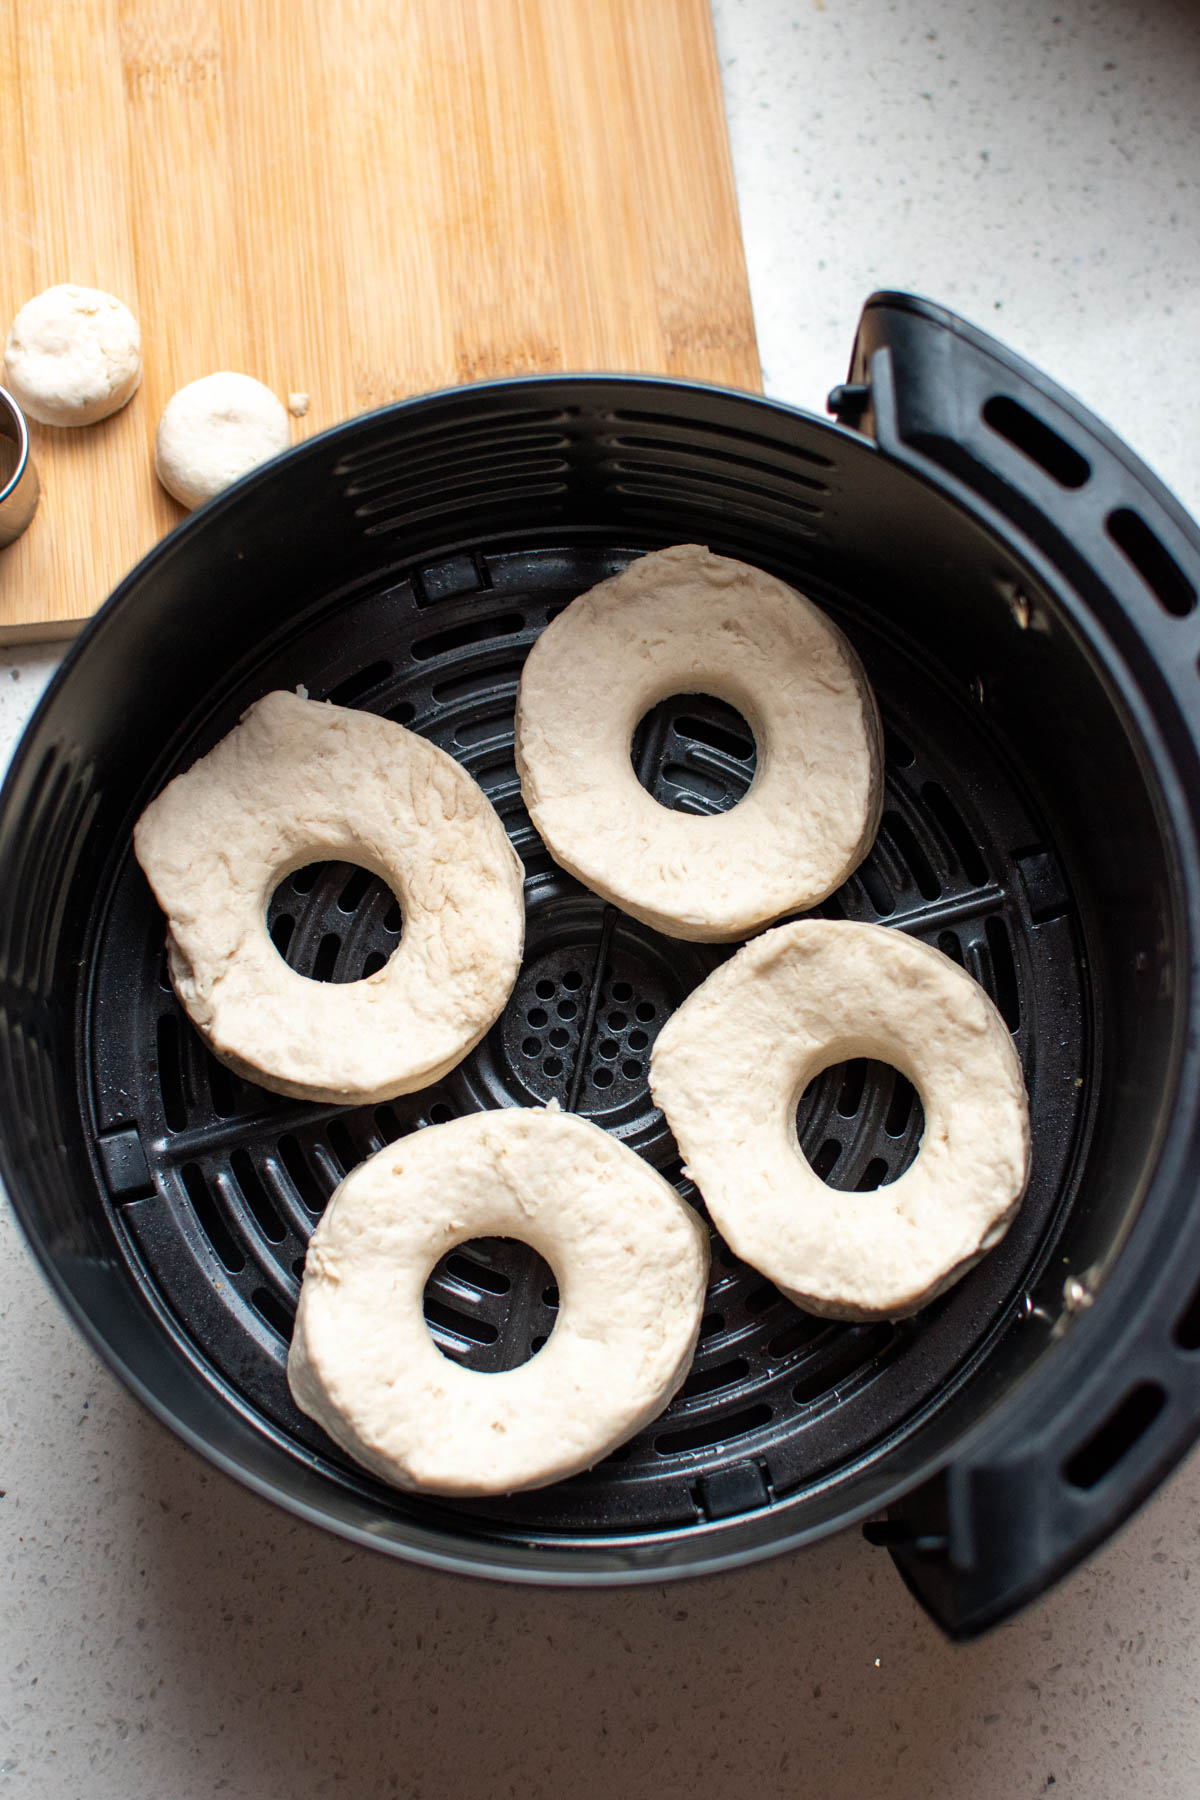 Four raw biscuit donuts in black air fryer basket on quartz counter.